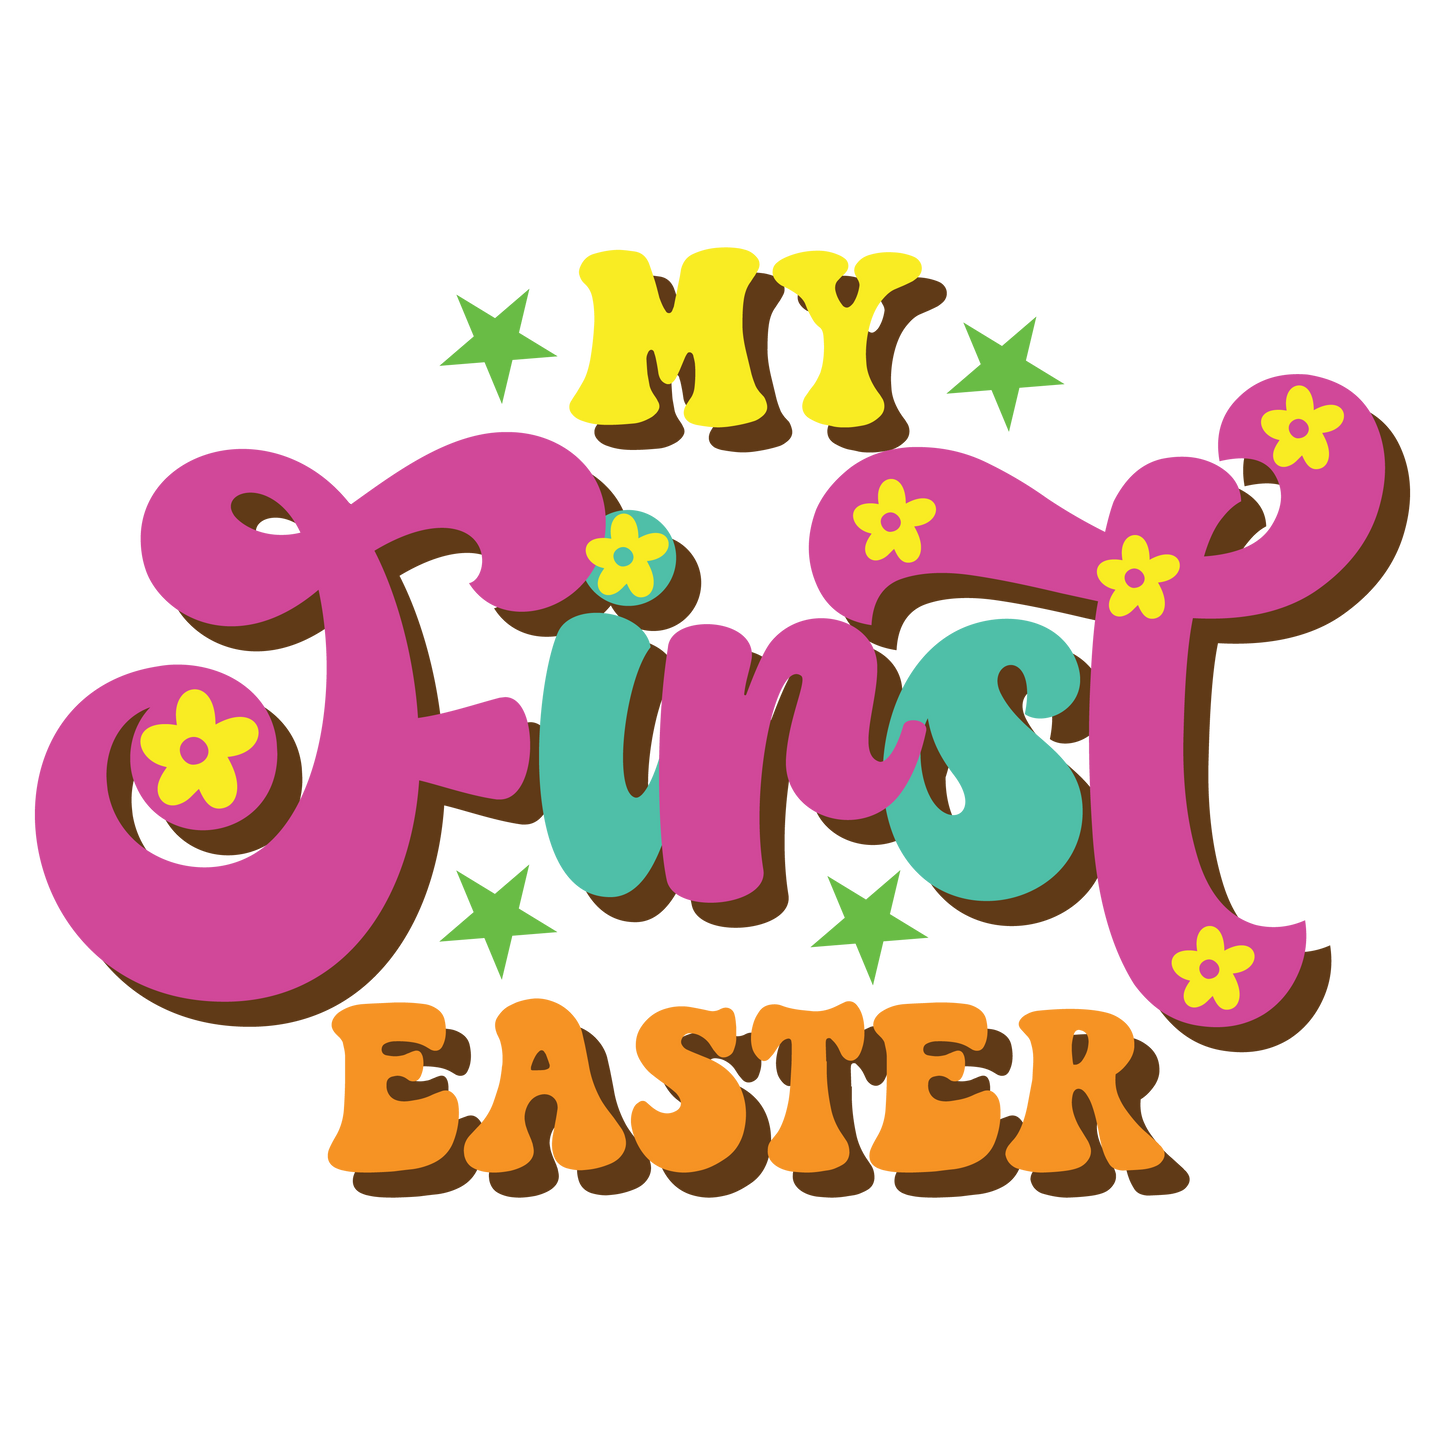 My First Easter